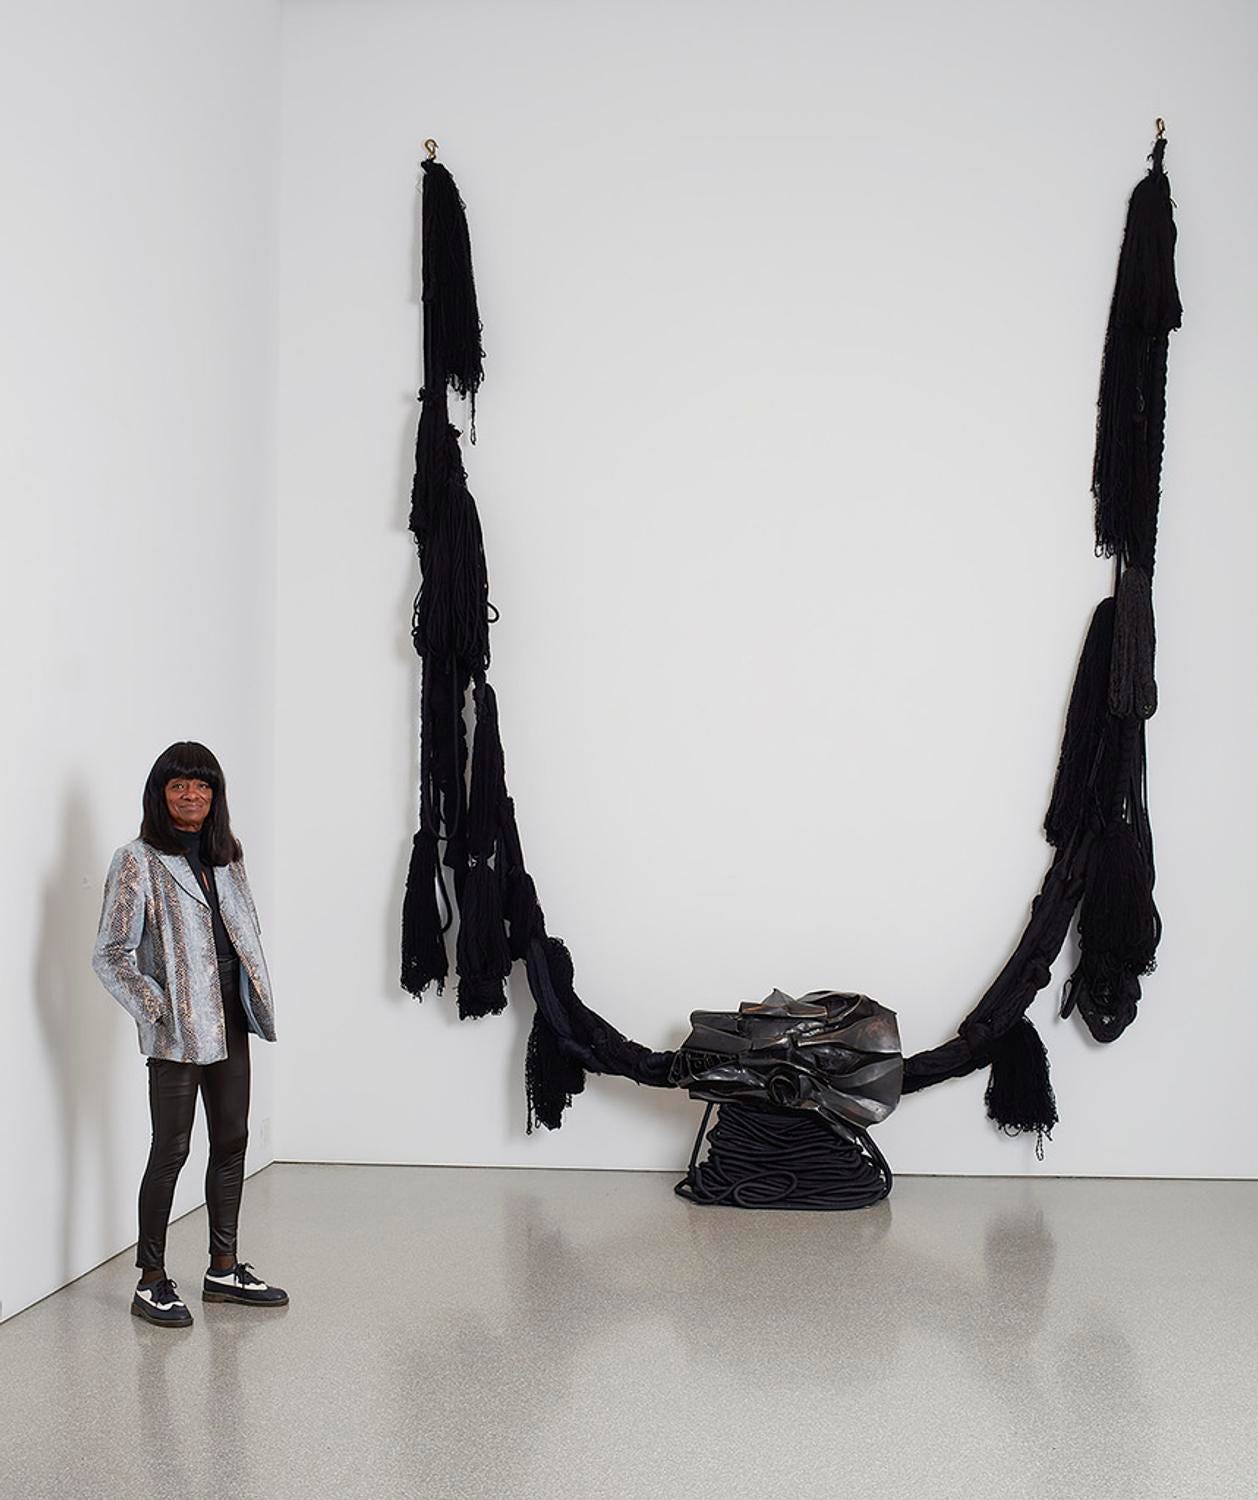 MoMA Acquires Monumental Sculpture by Barbara Chase-Riboud - Artwire Press  Release from ArtfixDaily.com